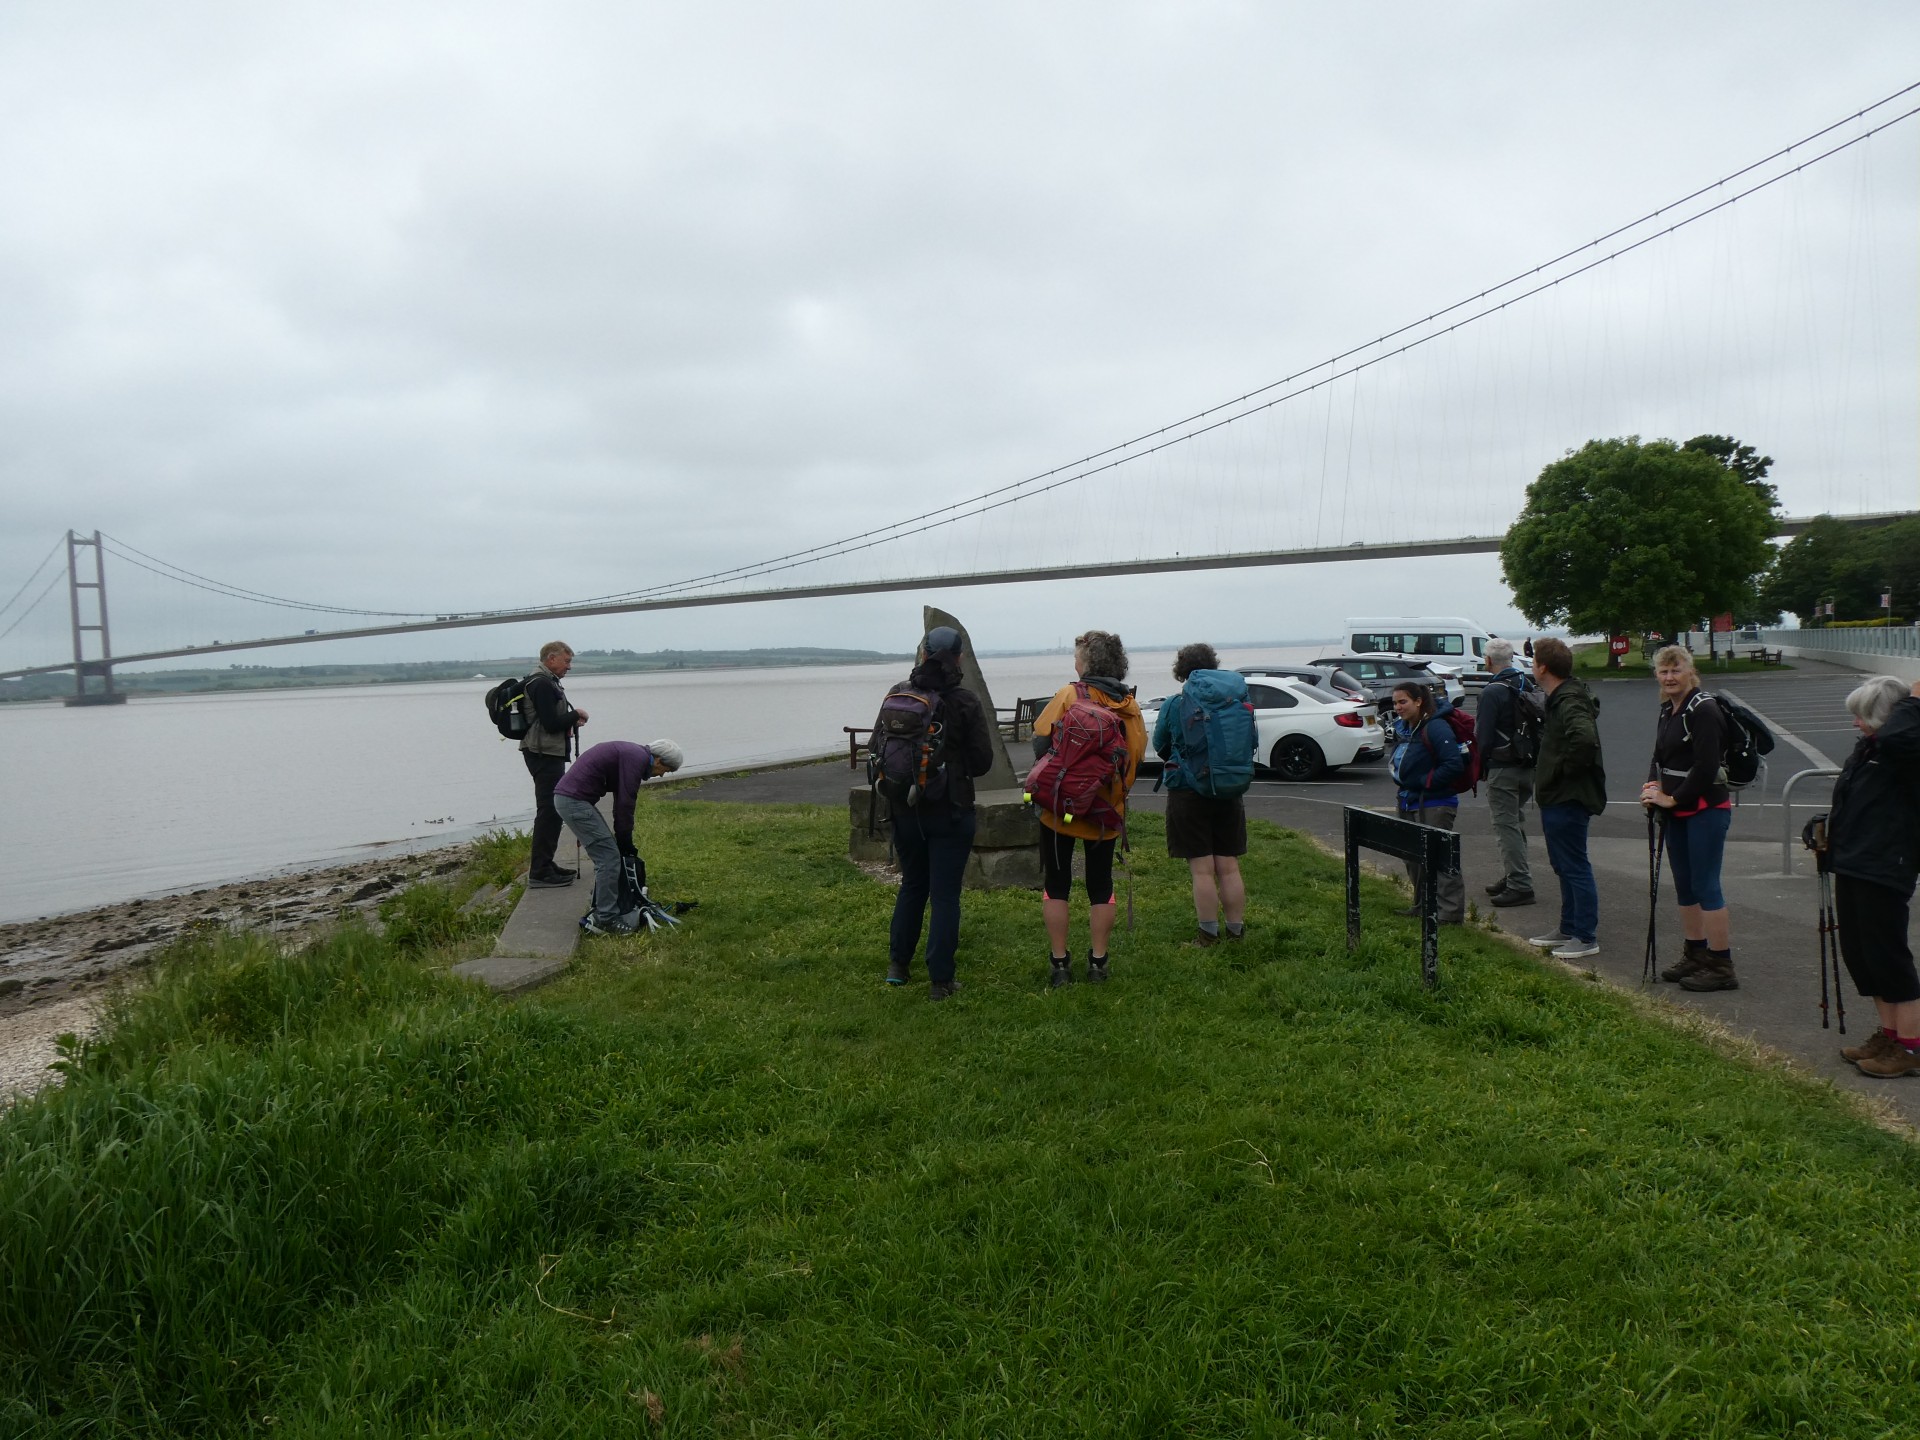 Start of the Wolds Way at Humber Bridge